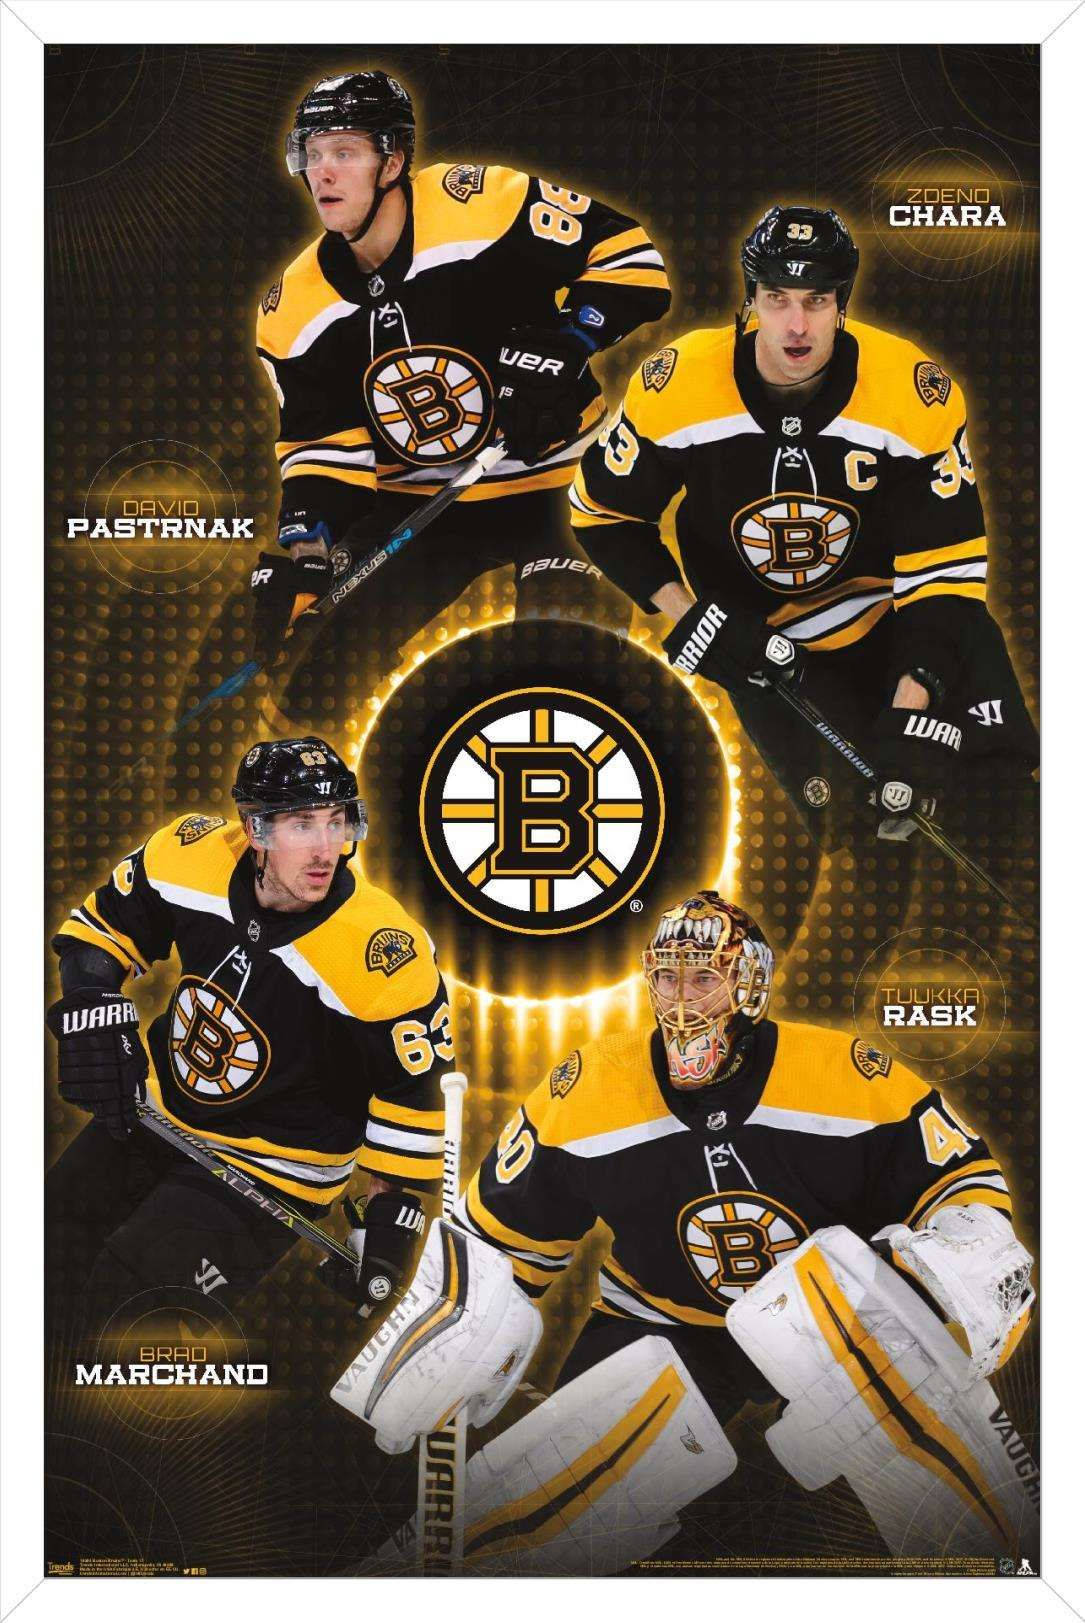 Exclusive Portrait Of Brad Marchand With His Boston Bruins Teammates.